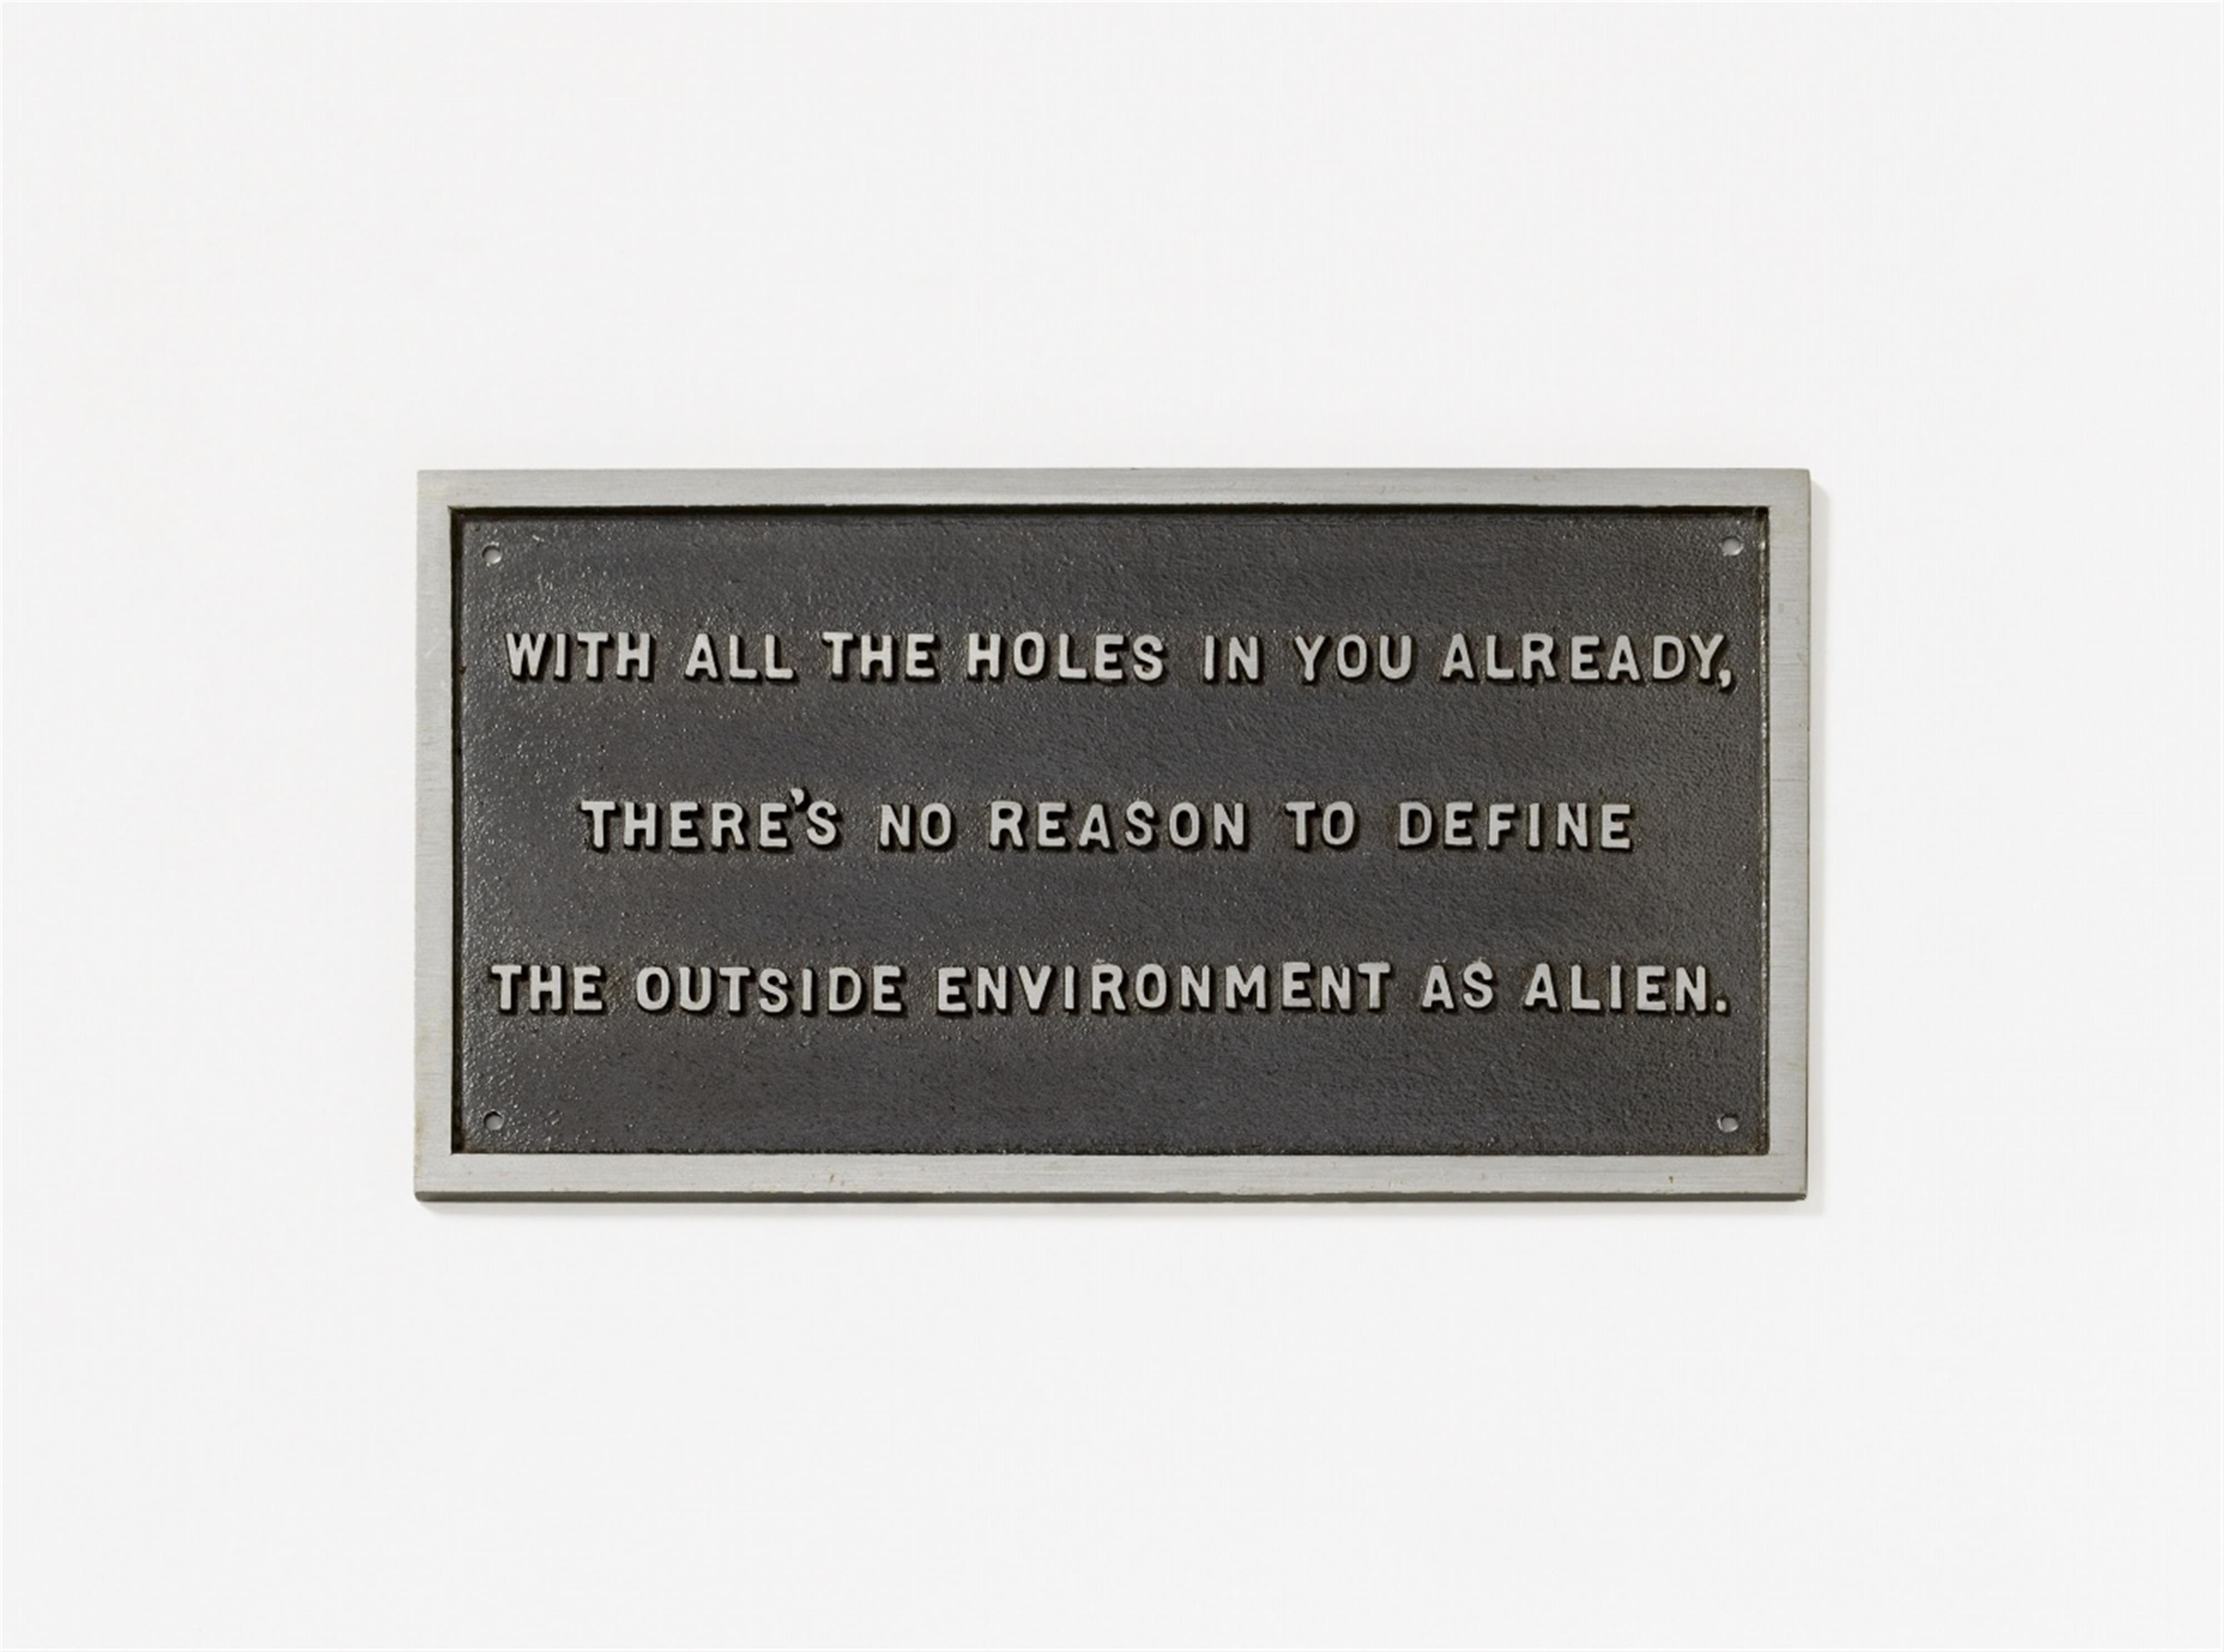 Jenny Holzer - From the Survival Series: With all the holes in you already, ... - image-1